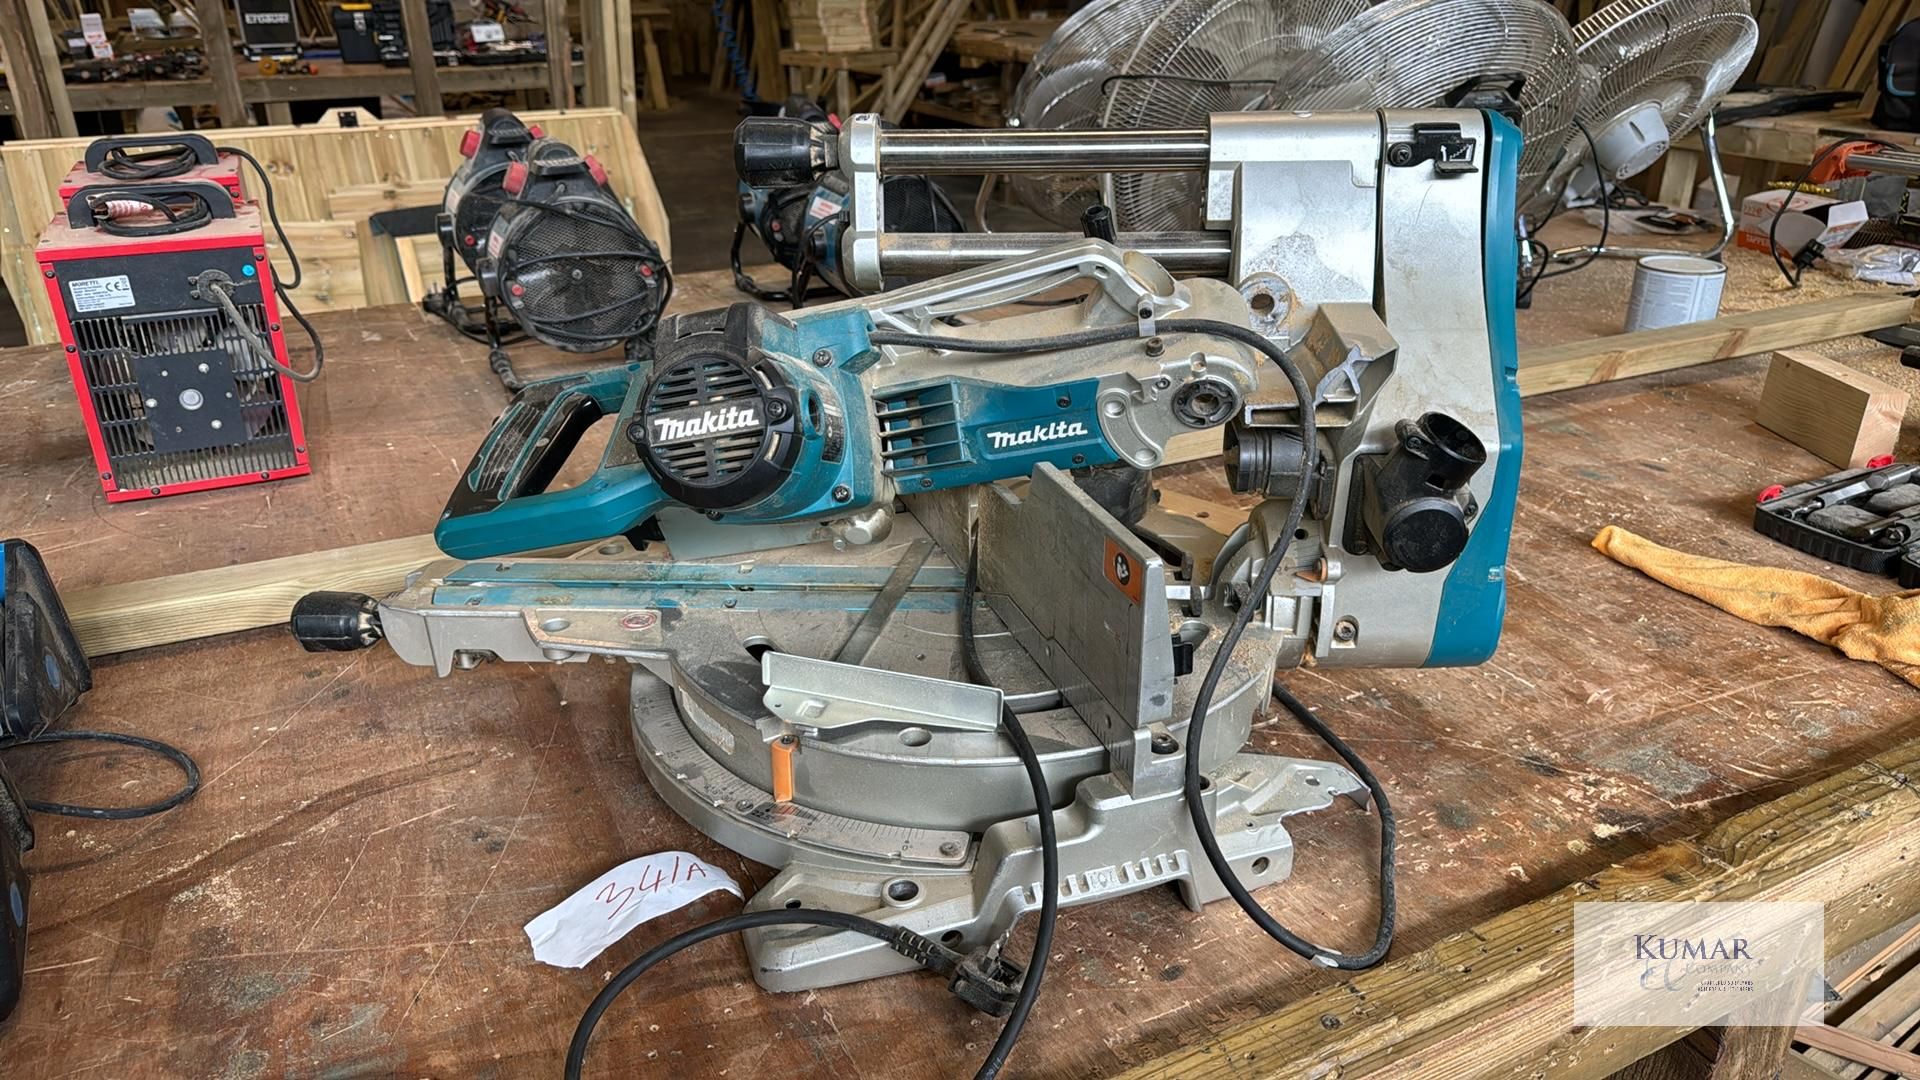 Makita LS1219 305mm Slide Compound Mitre Saw, Serial No.1176G, (06/2018) - Sold for Spares or